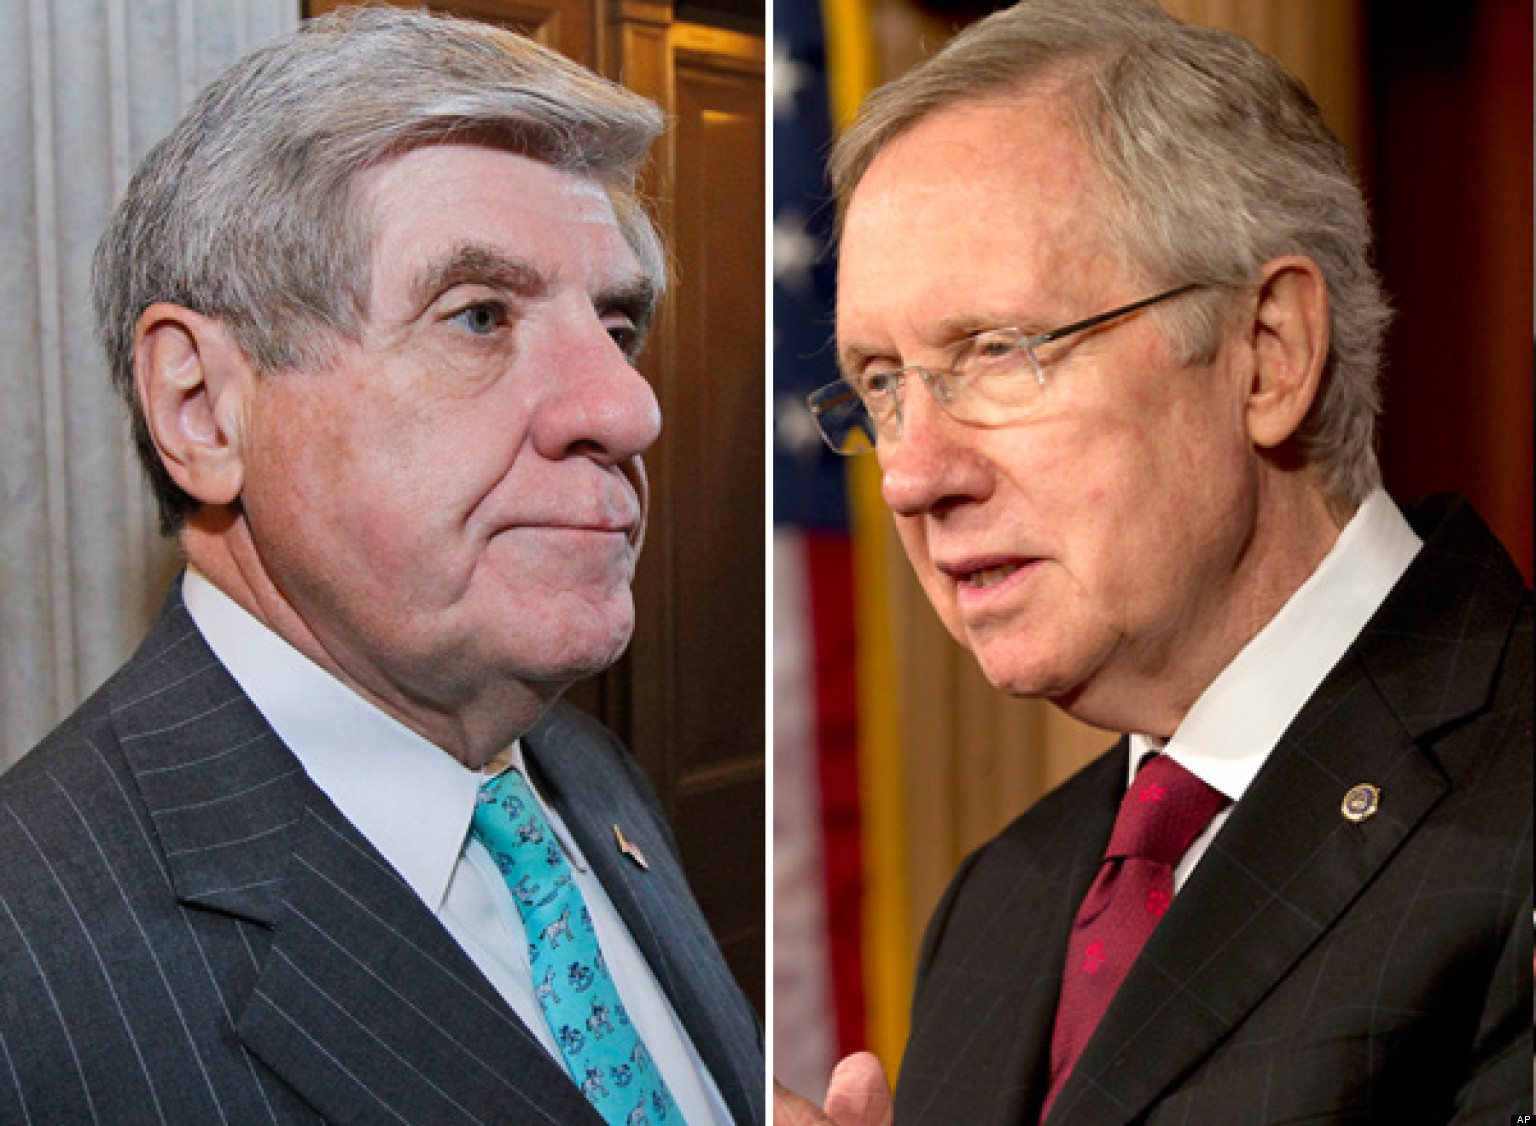 Harry Reid Raves About Ben Nelson's 'Mop Of Real Hair' (VIDEO)